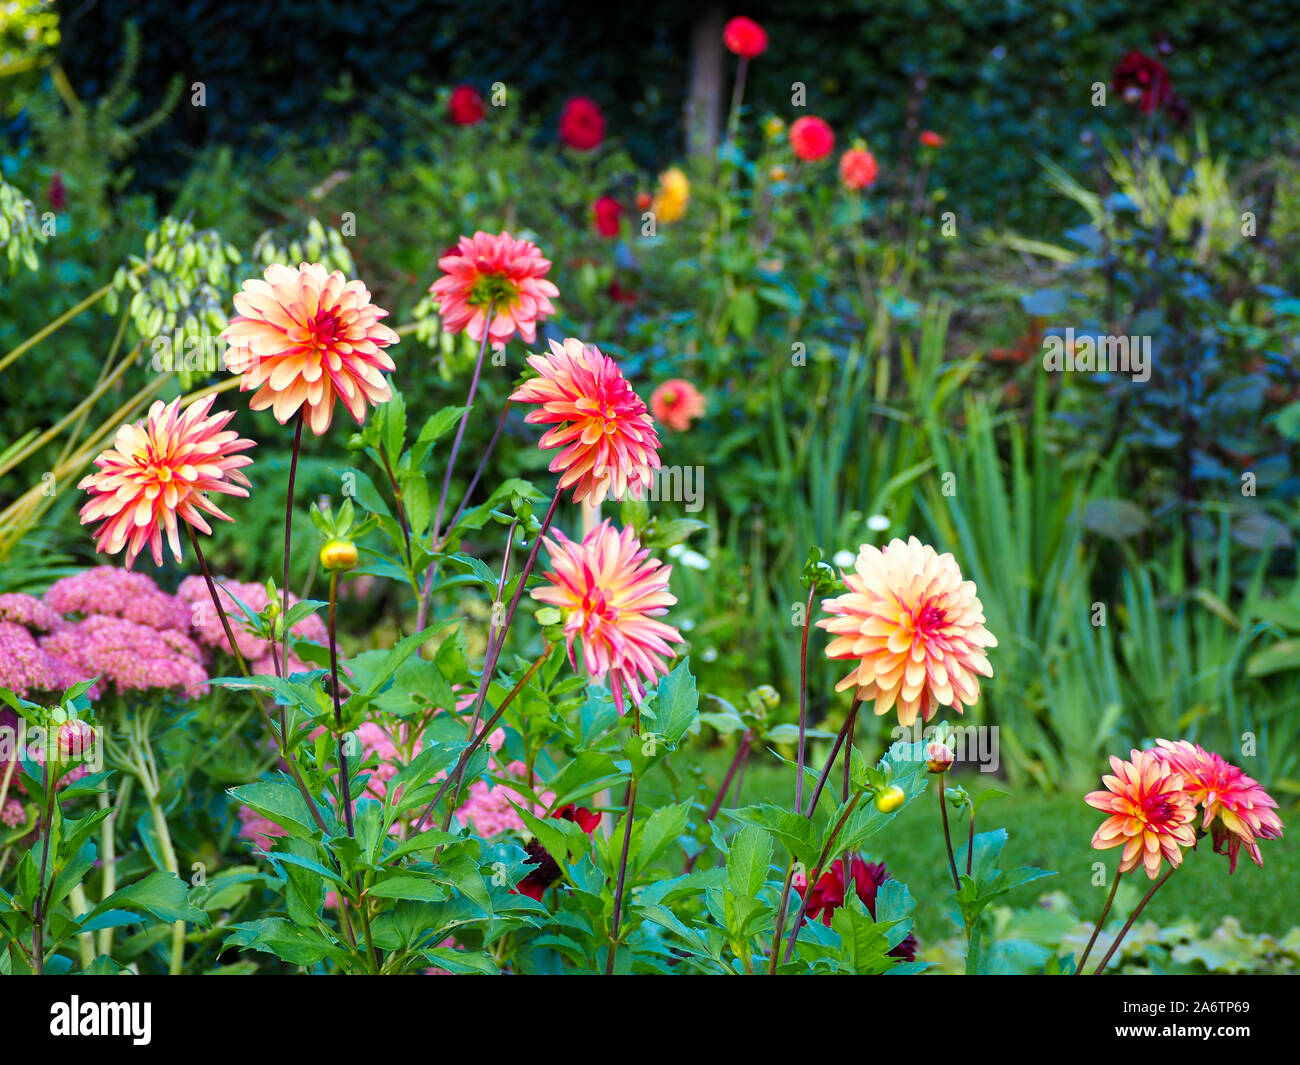 Dahlia 'Julie One' at Chenies Manor garden. A corner of the Sunken garden; part of the terraced herbaceous border display in late Summer. Stock Photo